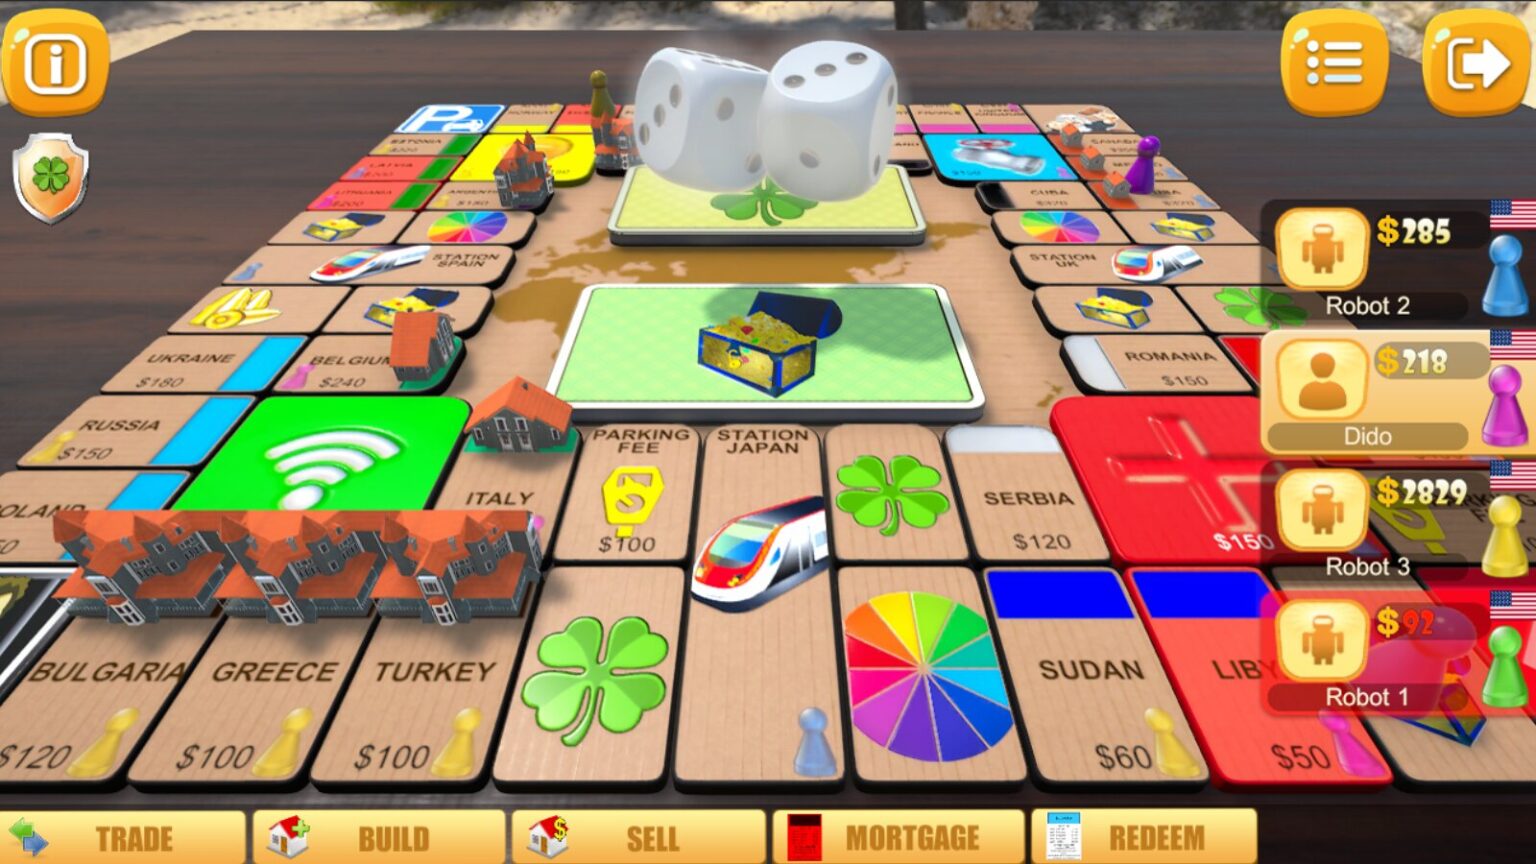 Monopoly-inspired mobile game with vibrant digital board